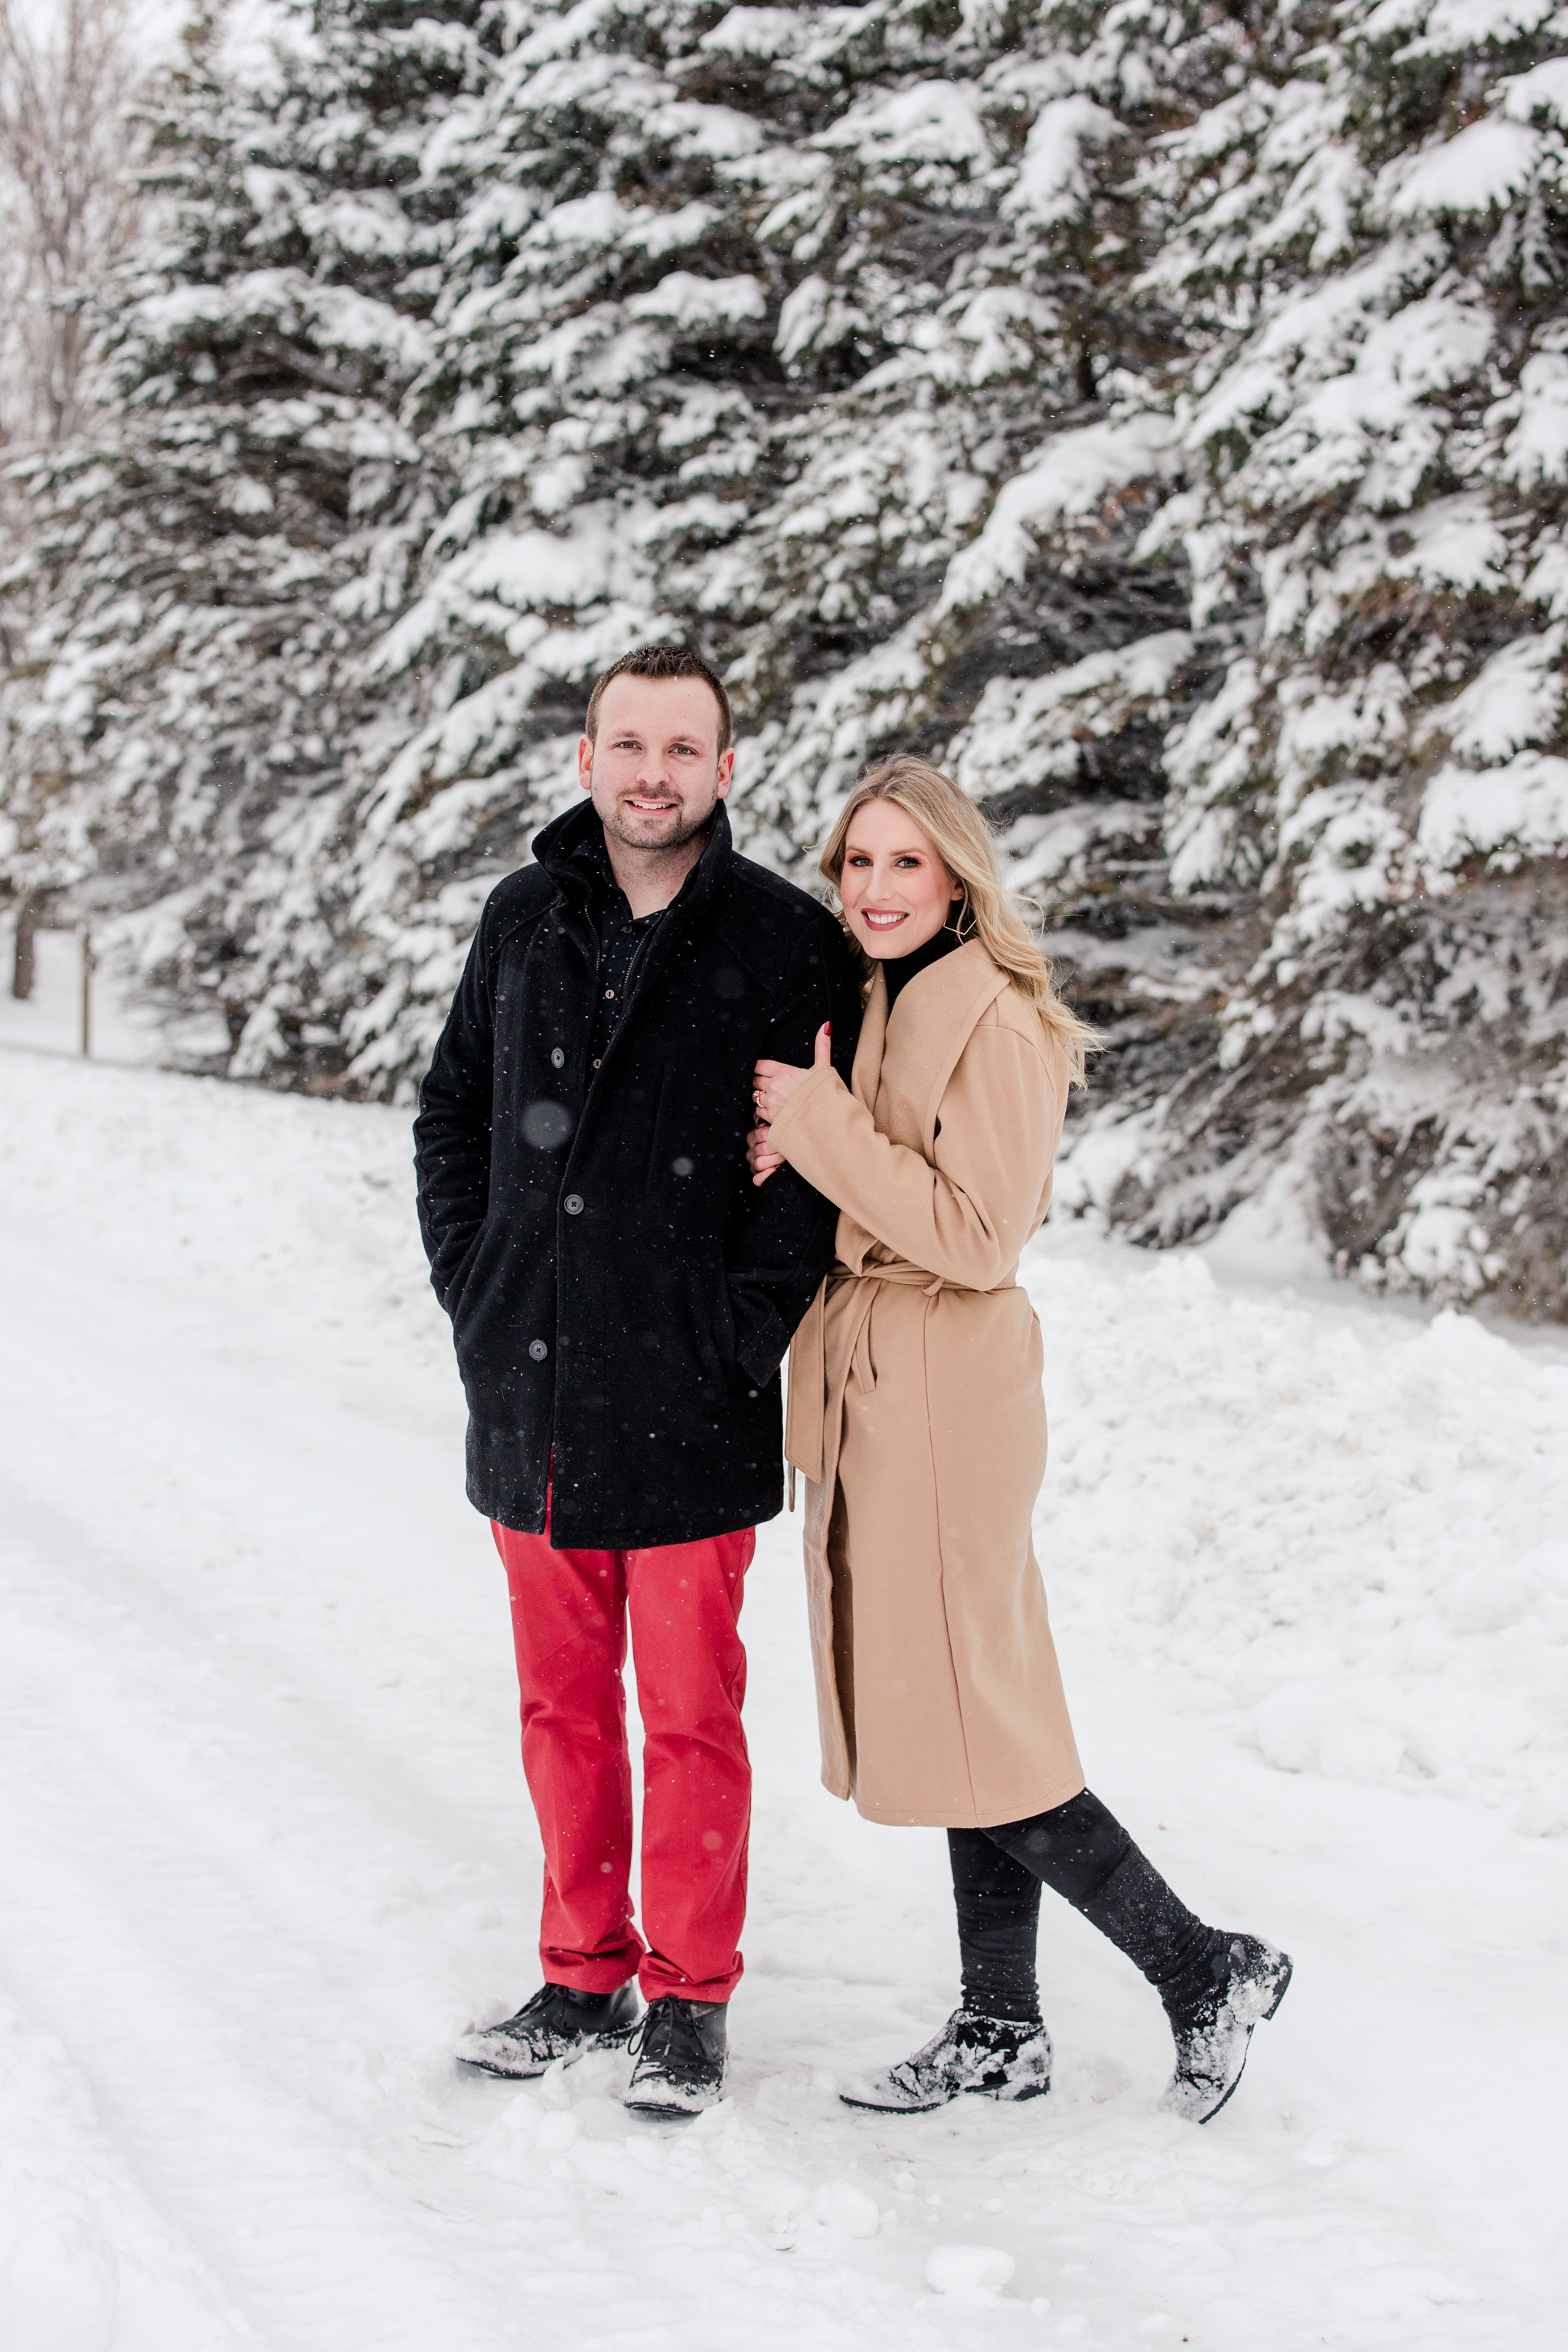 Perham Engagement and Wedding Photographers, in home engagement photos